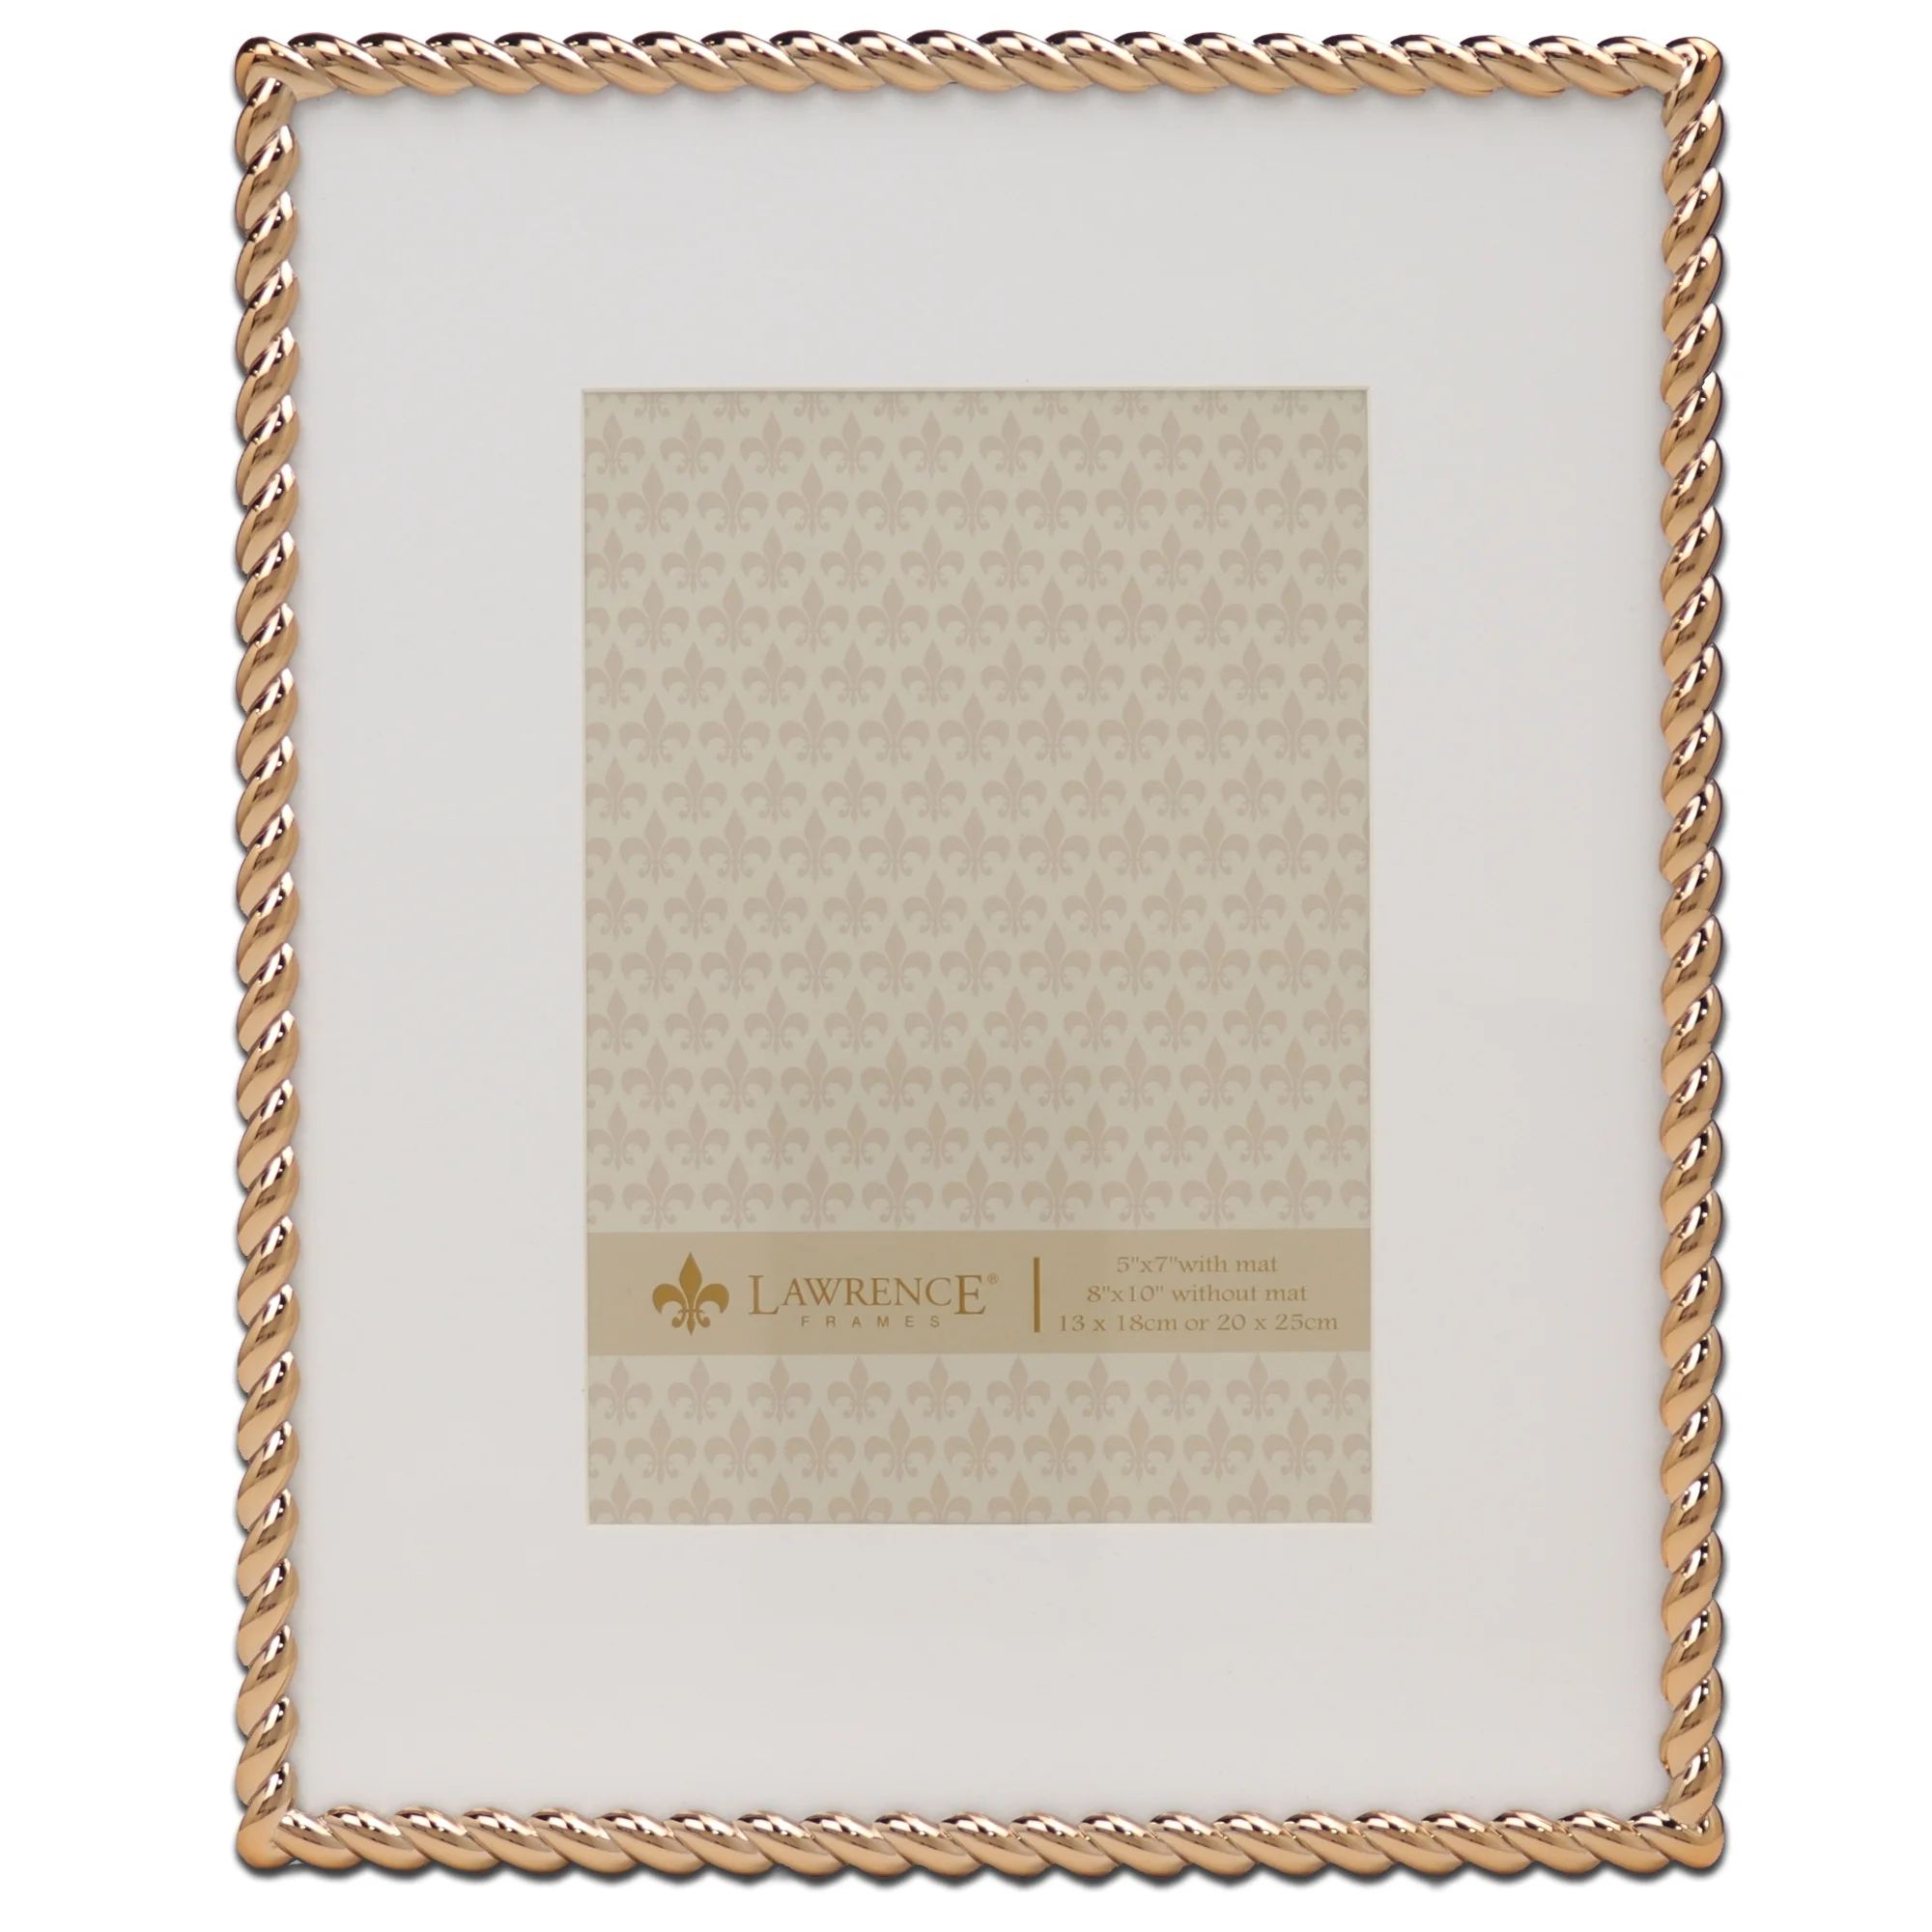 8x10 High Quality Polished Gold Cast Metal Picture Frame - Rope Design with Mat for 5x7 | Walmart (US)